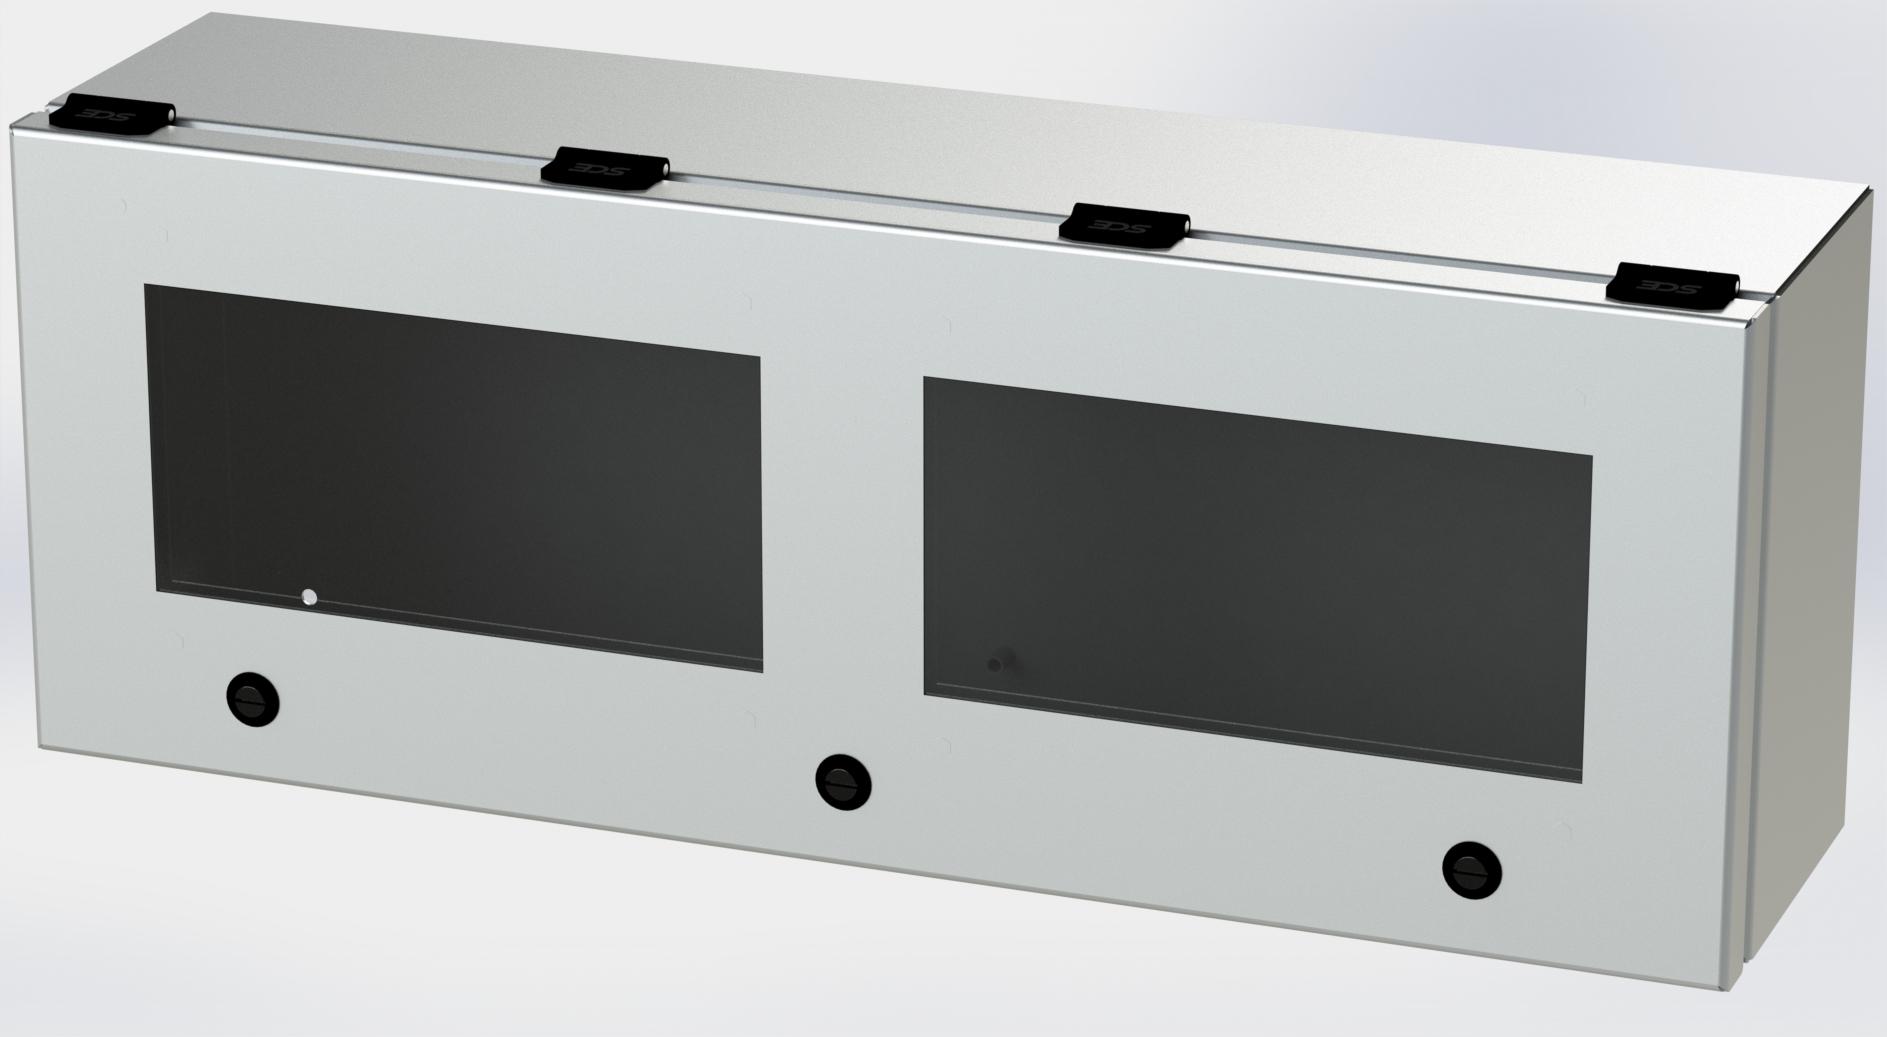 Saginaw Control SCE-L9246ELJWSS S.S. ELJ Trough Window Enclosure, Height:9.00", Width:24.00", Depth:6.00", #4 brushed finish on all exterior surfaces. Optional sub-panels are powder coated white.